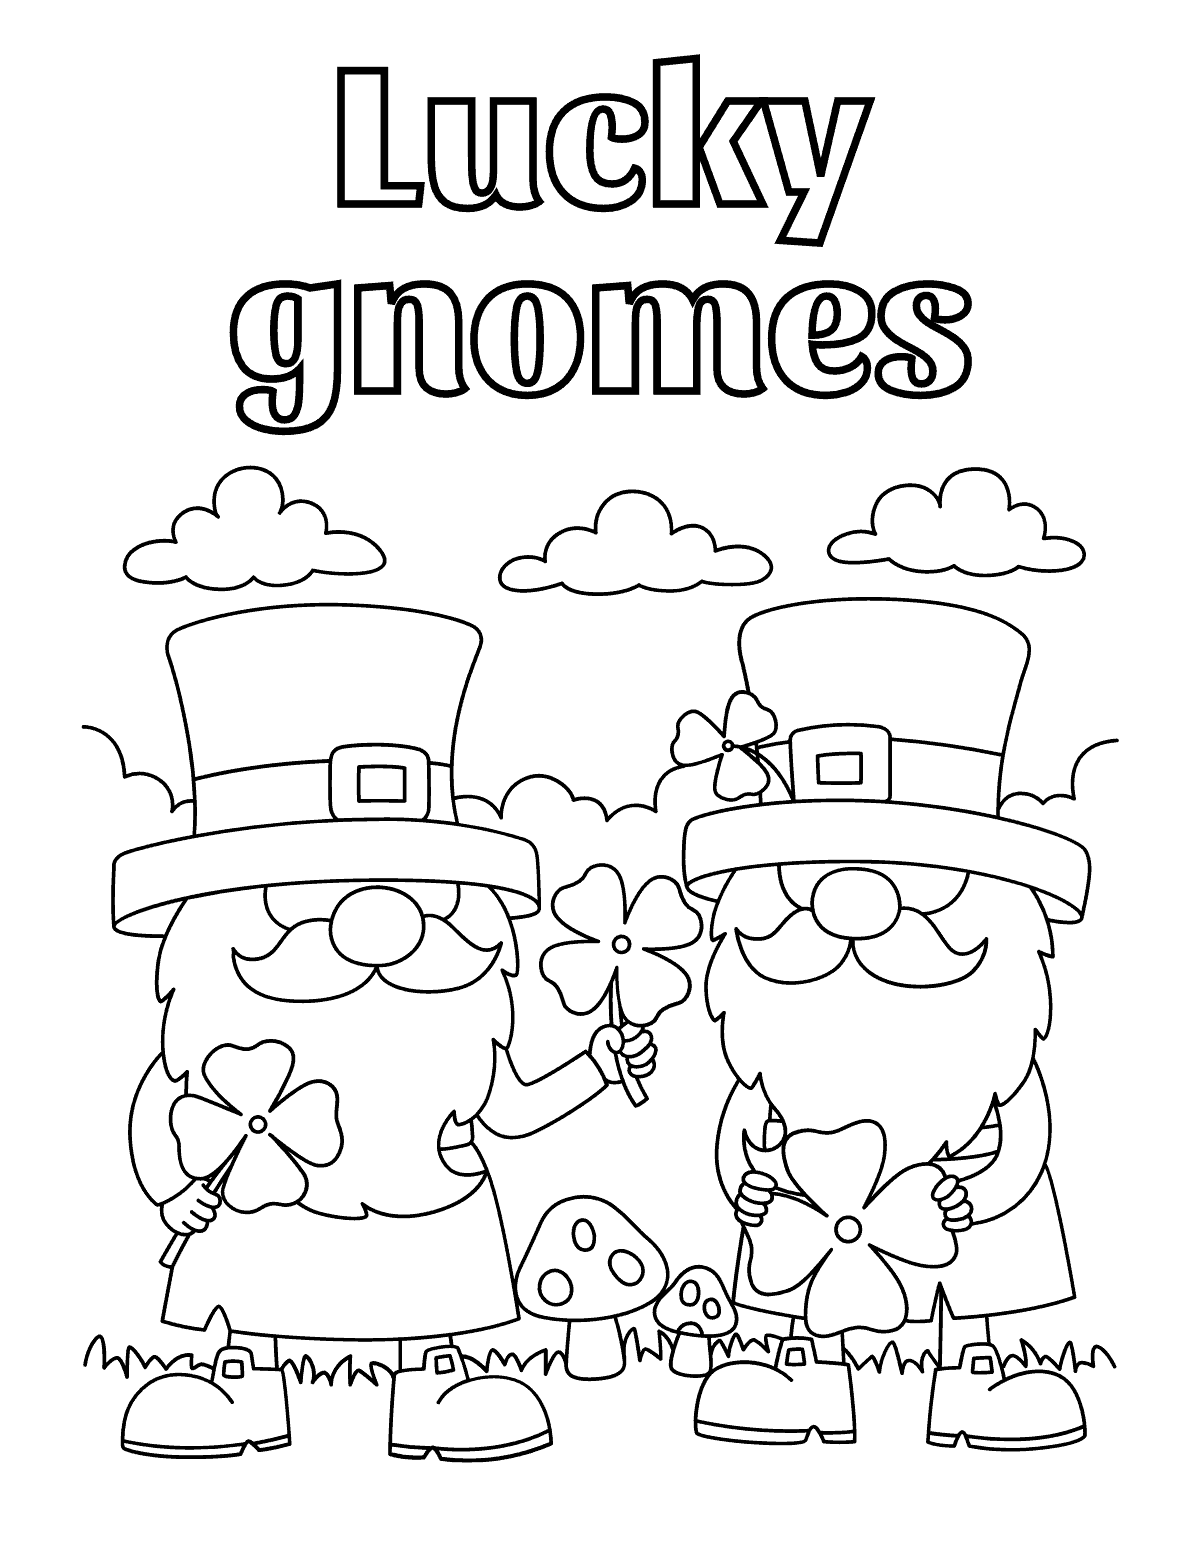 Lucky Gnomes Coloring Sheet